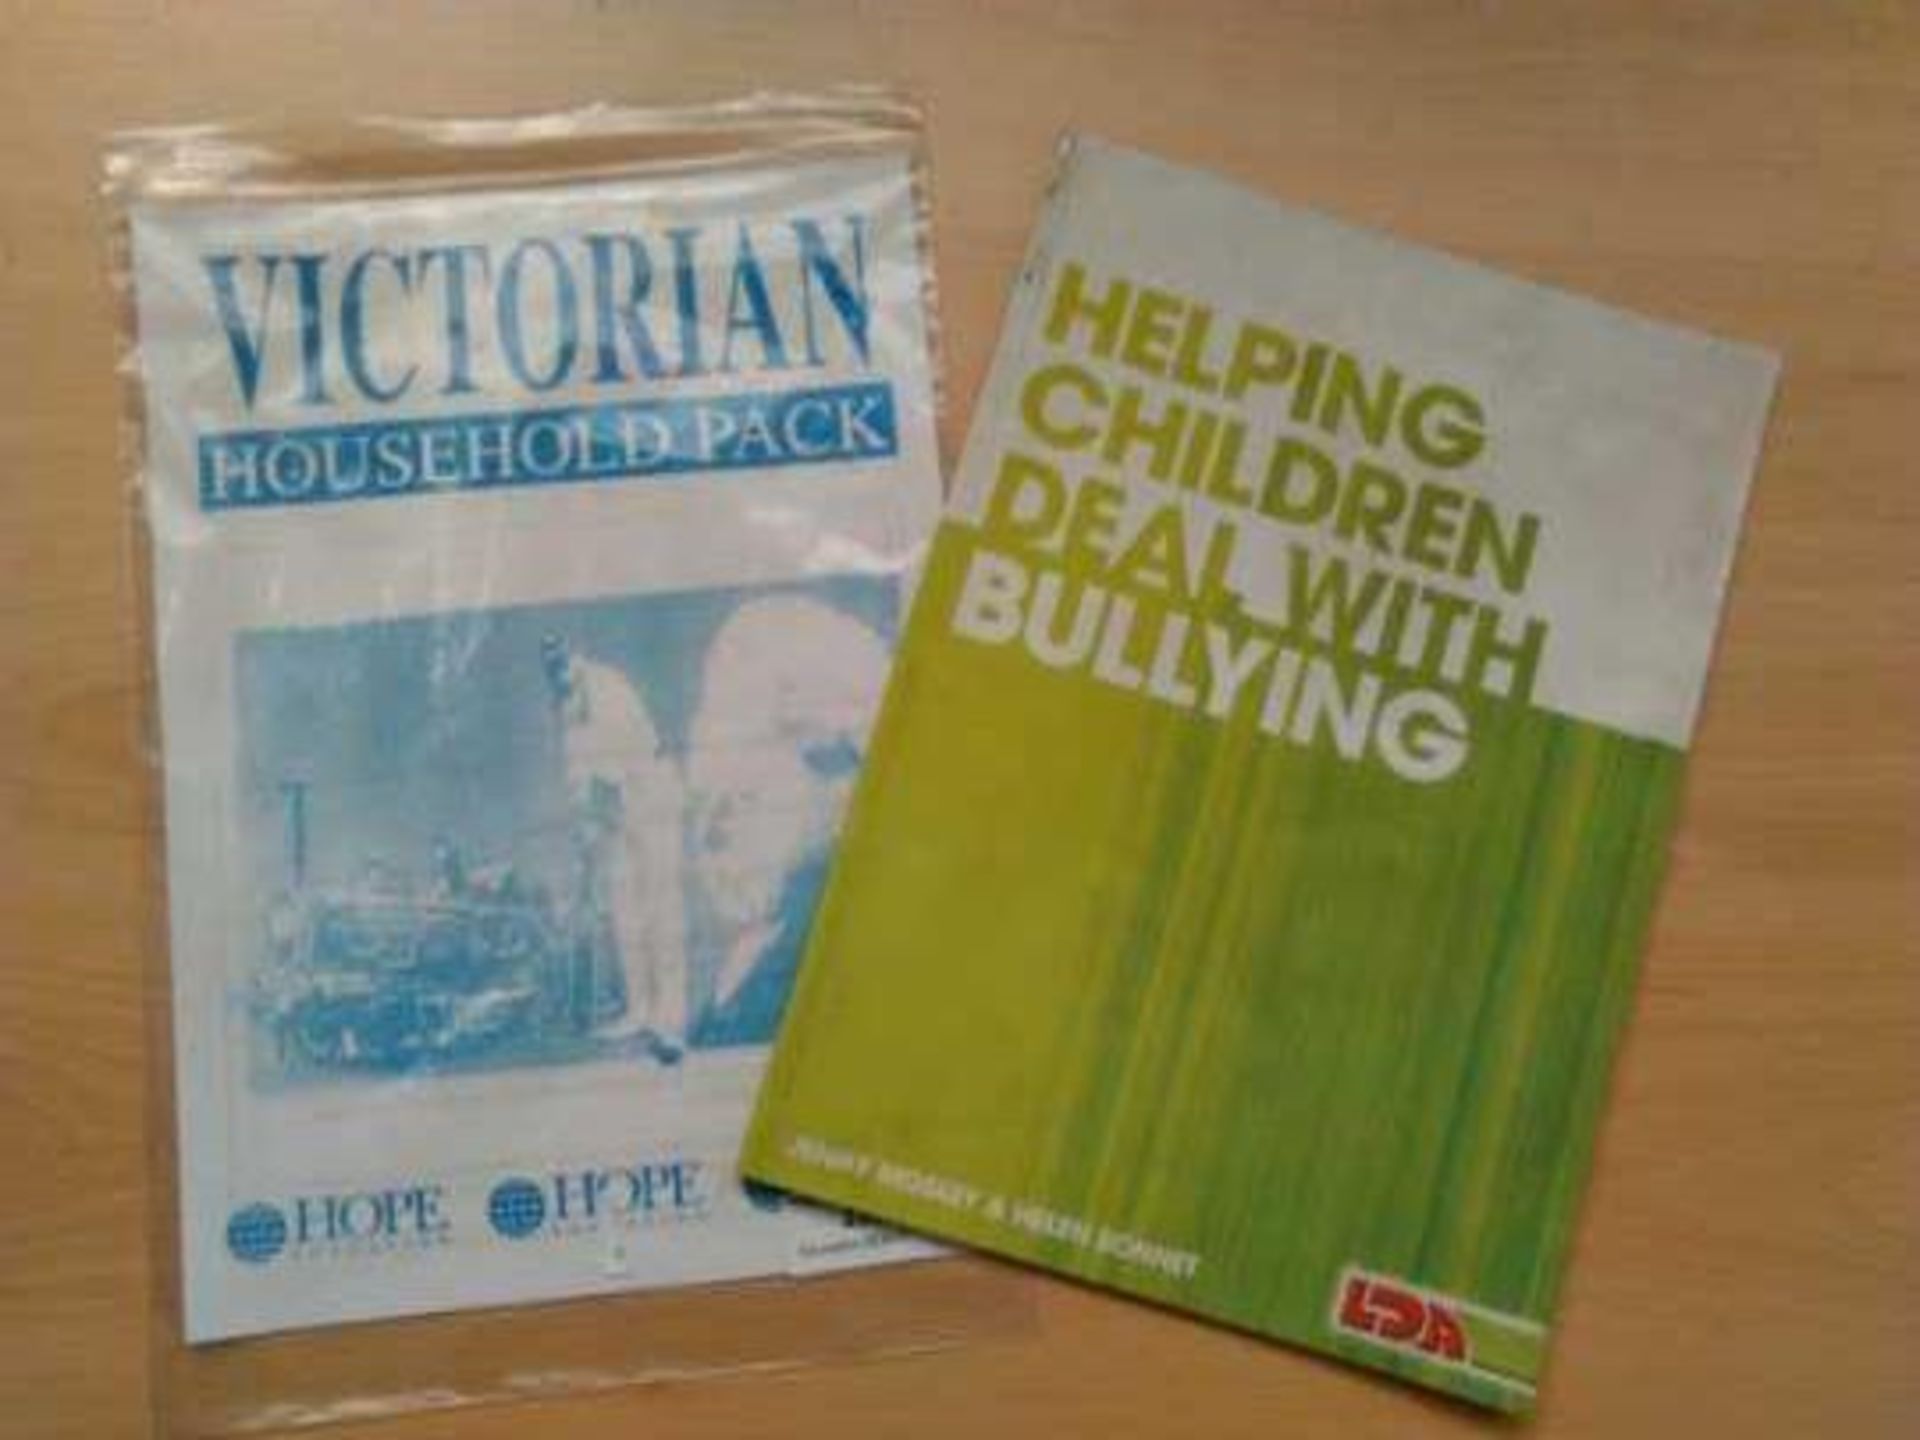 Lot contains 6x Victorian household packs SKU code - RE002PP1 7x Helping children deal with bullying